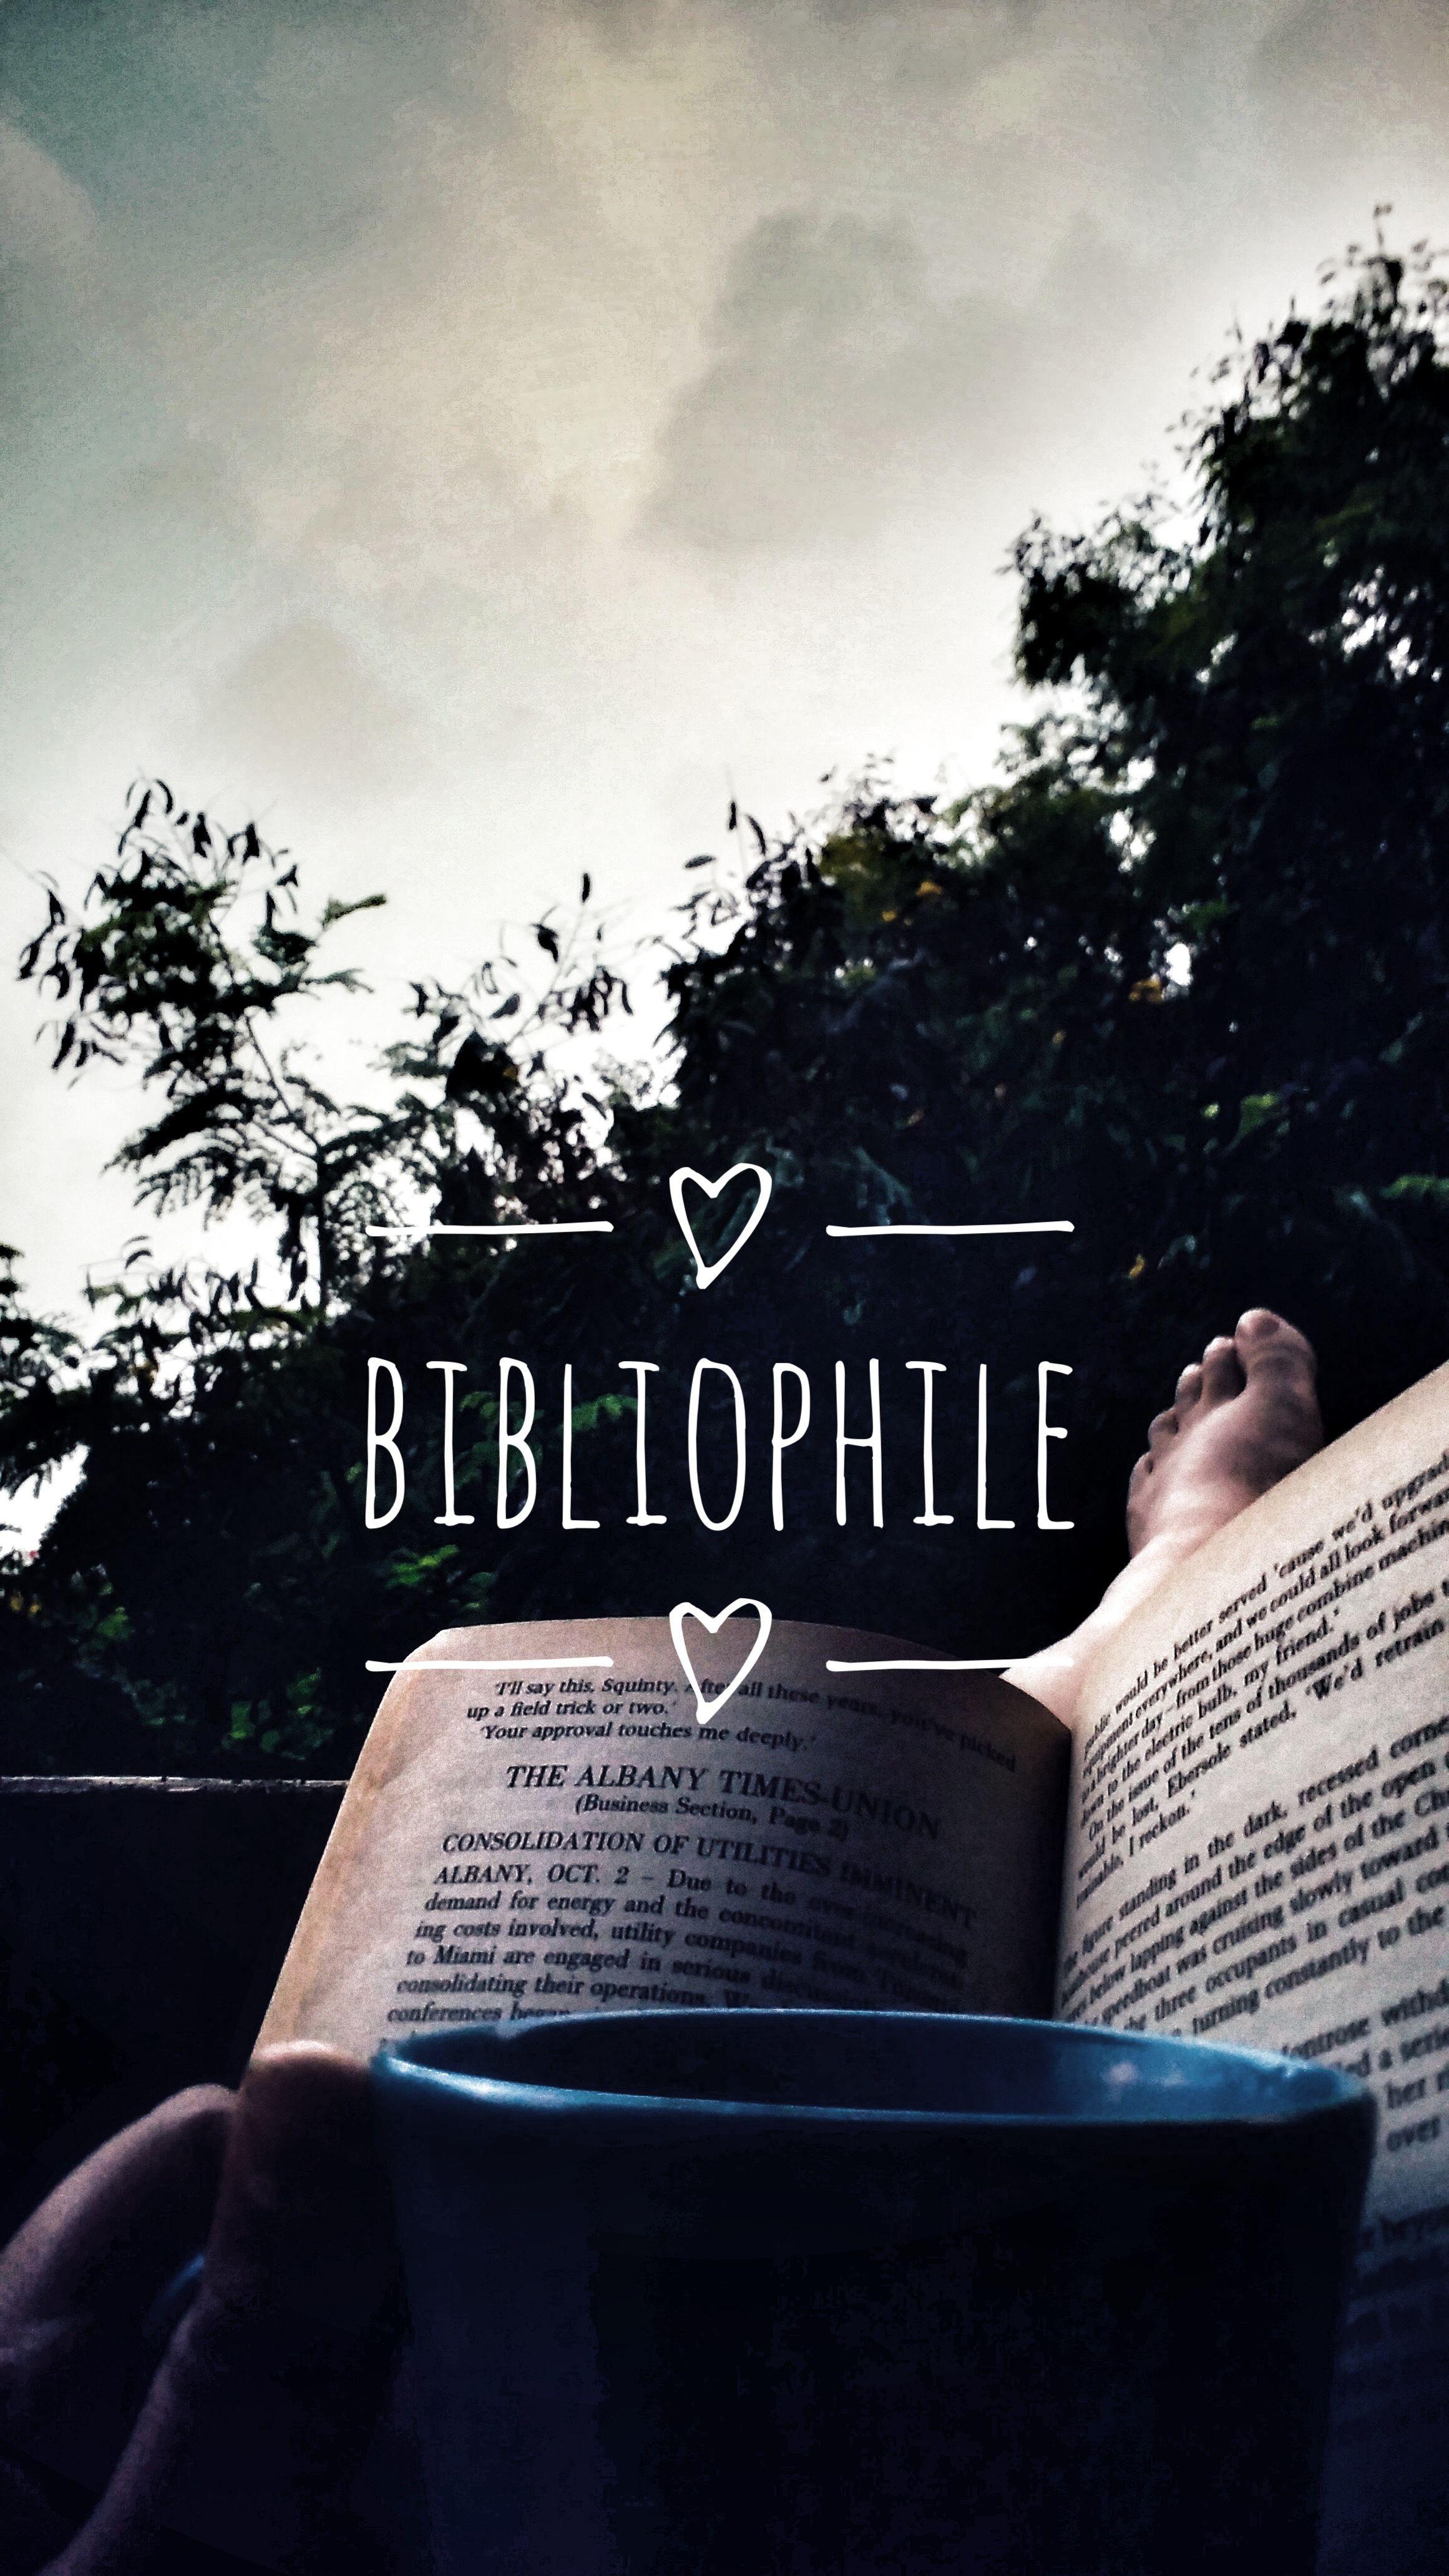 Bibliophile. Quotes for book lovers, Reading wallpaper, Book wallpaper